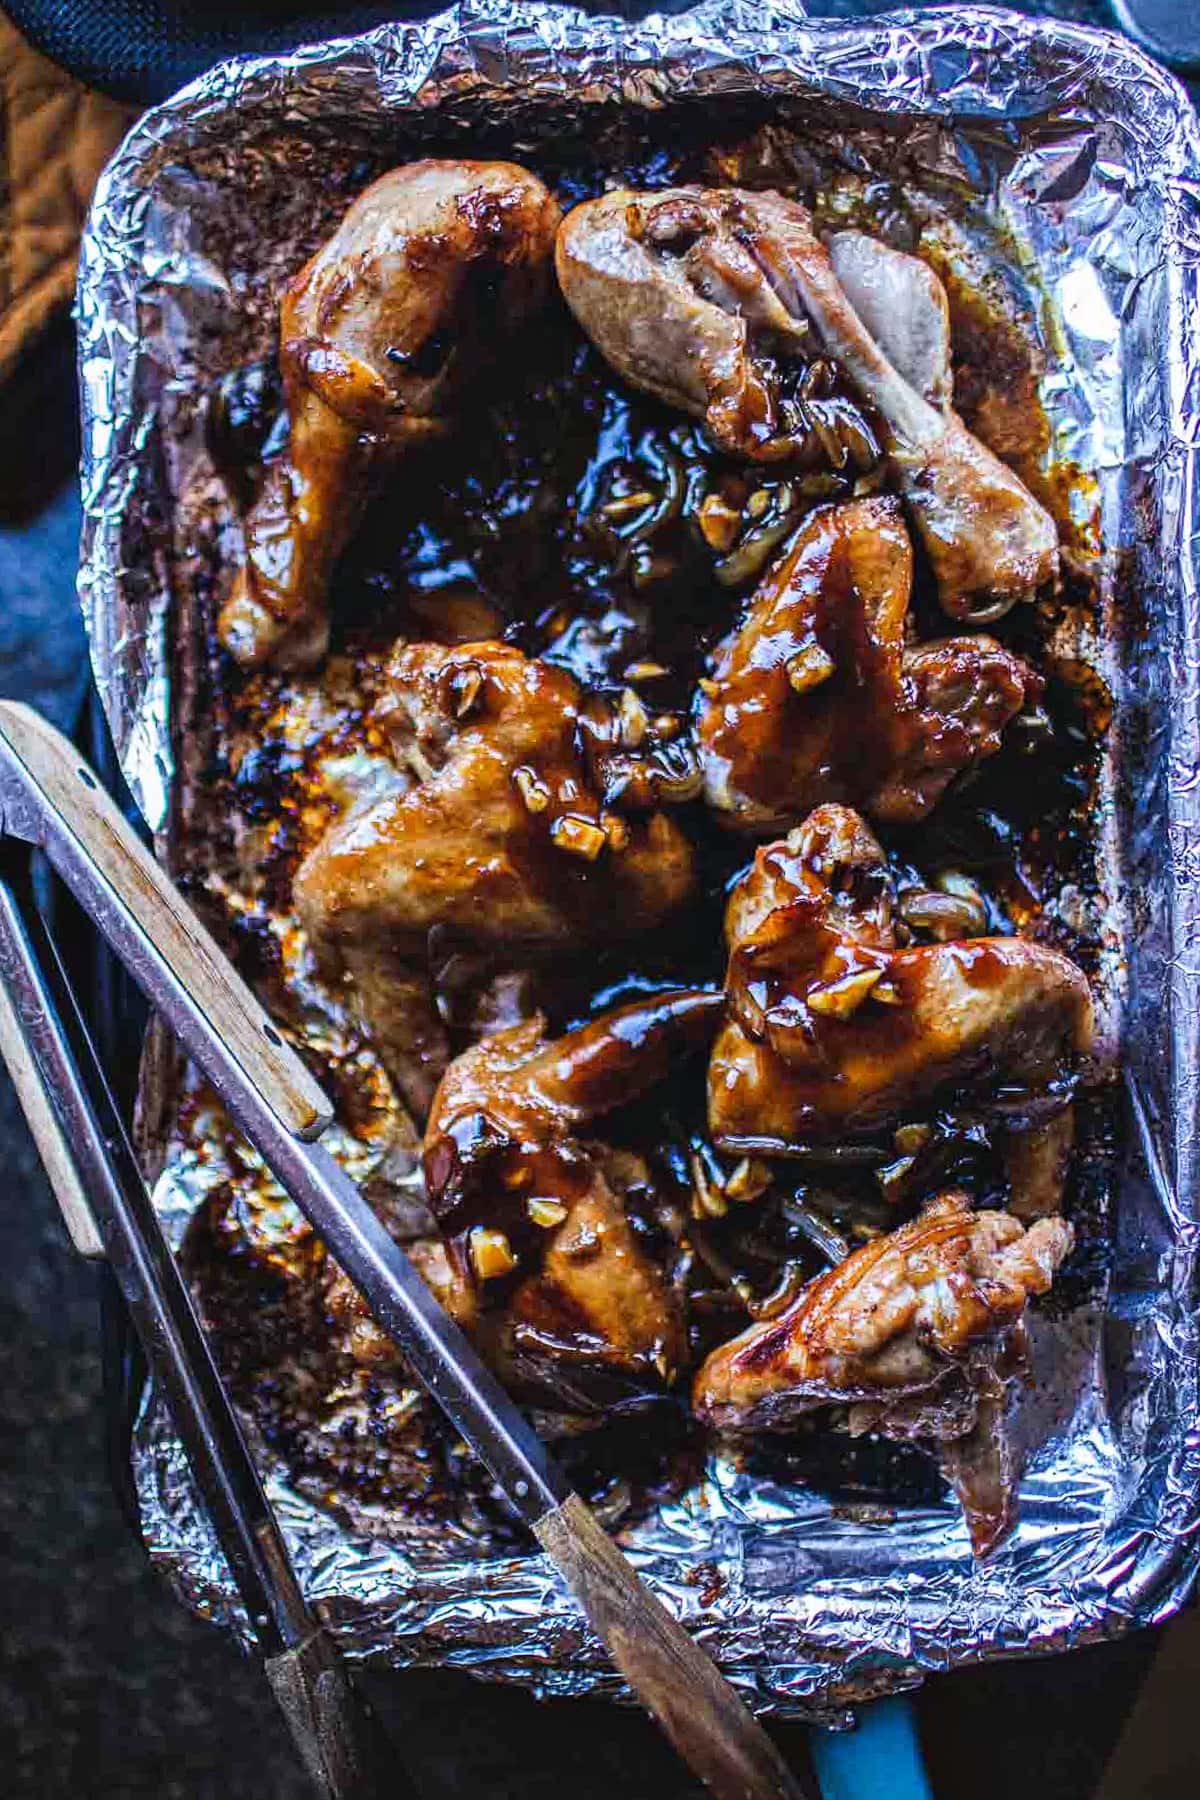 cooked wings with caramelized onion sauce on a baking sheet.